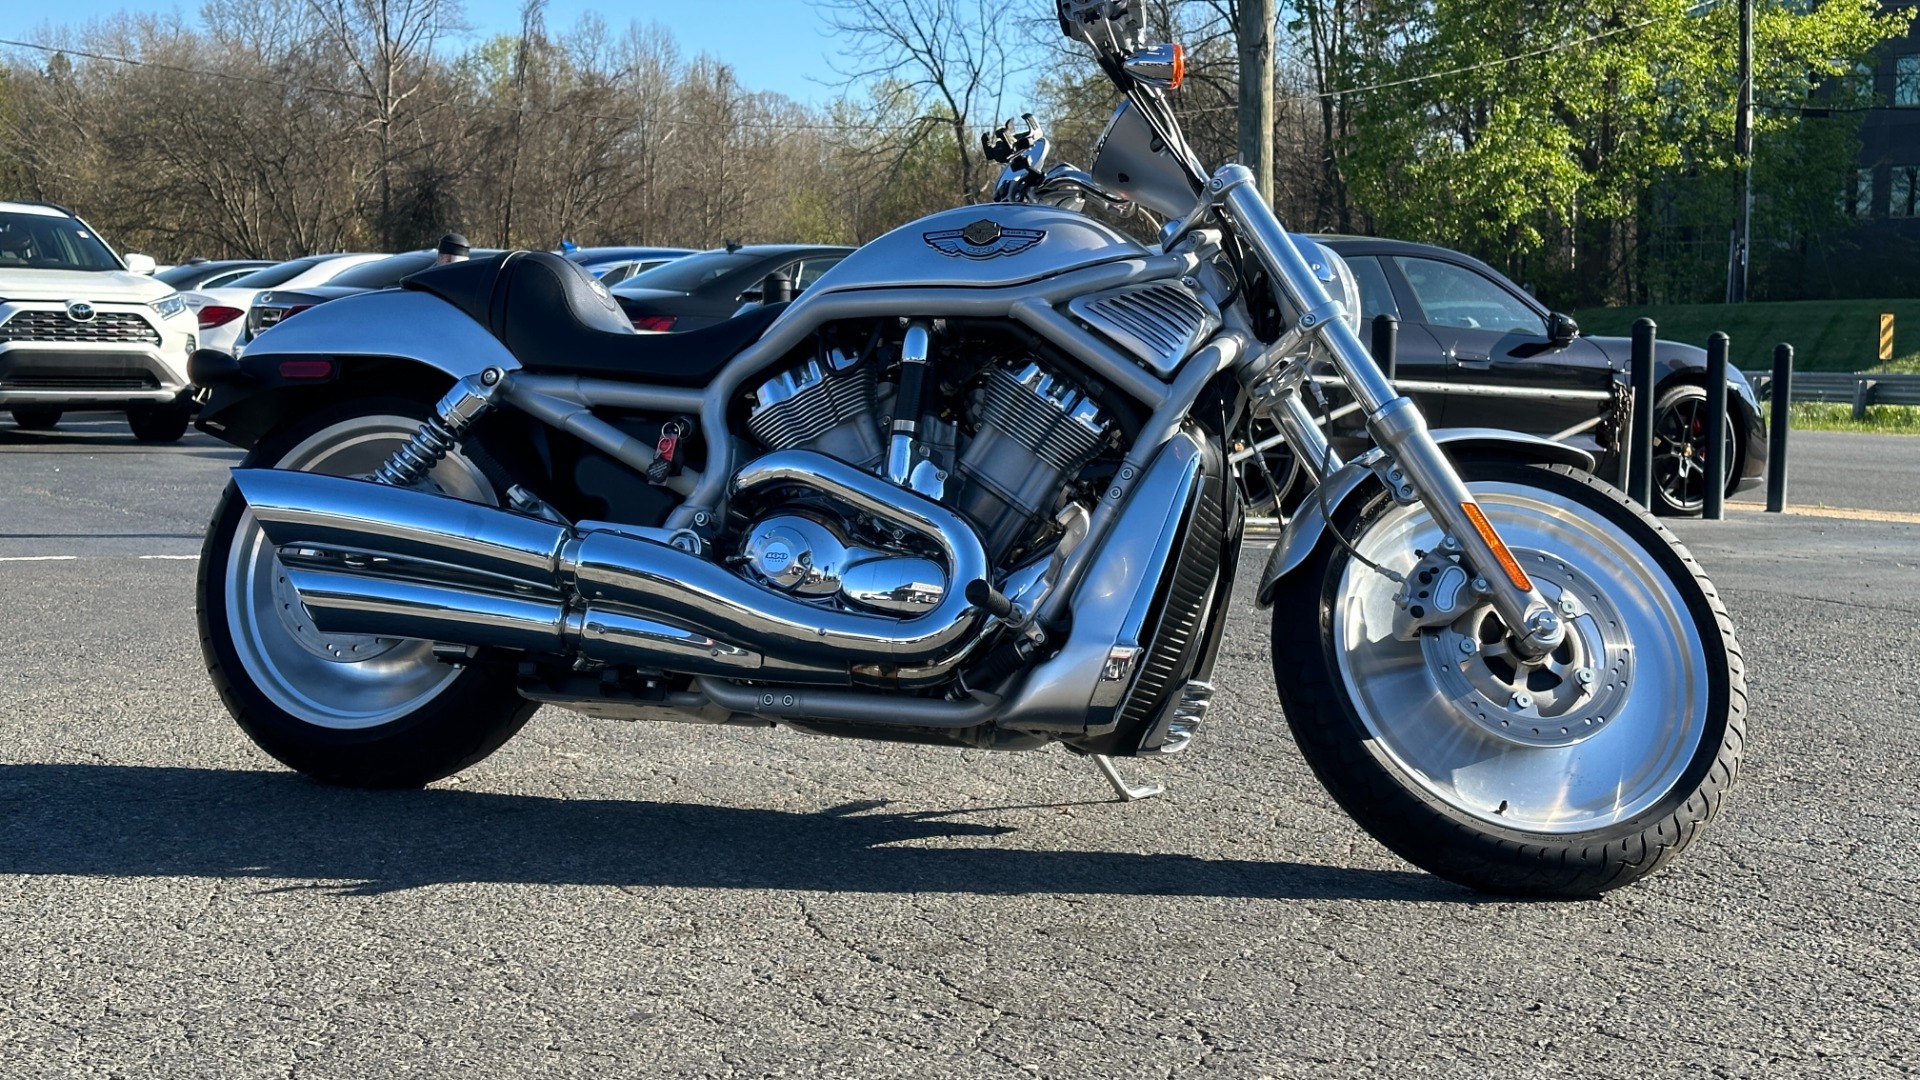 Used 2003 Harley Davidson V Rod ANNIVERSARY EDITION / 1130CC ENGINE / BREMBO BRAKES / VORTEX AIR SCOOPS for sale Sold at Formula Imports in Charlotte NC 28227 54